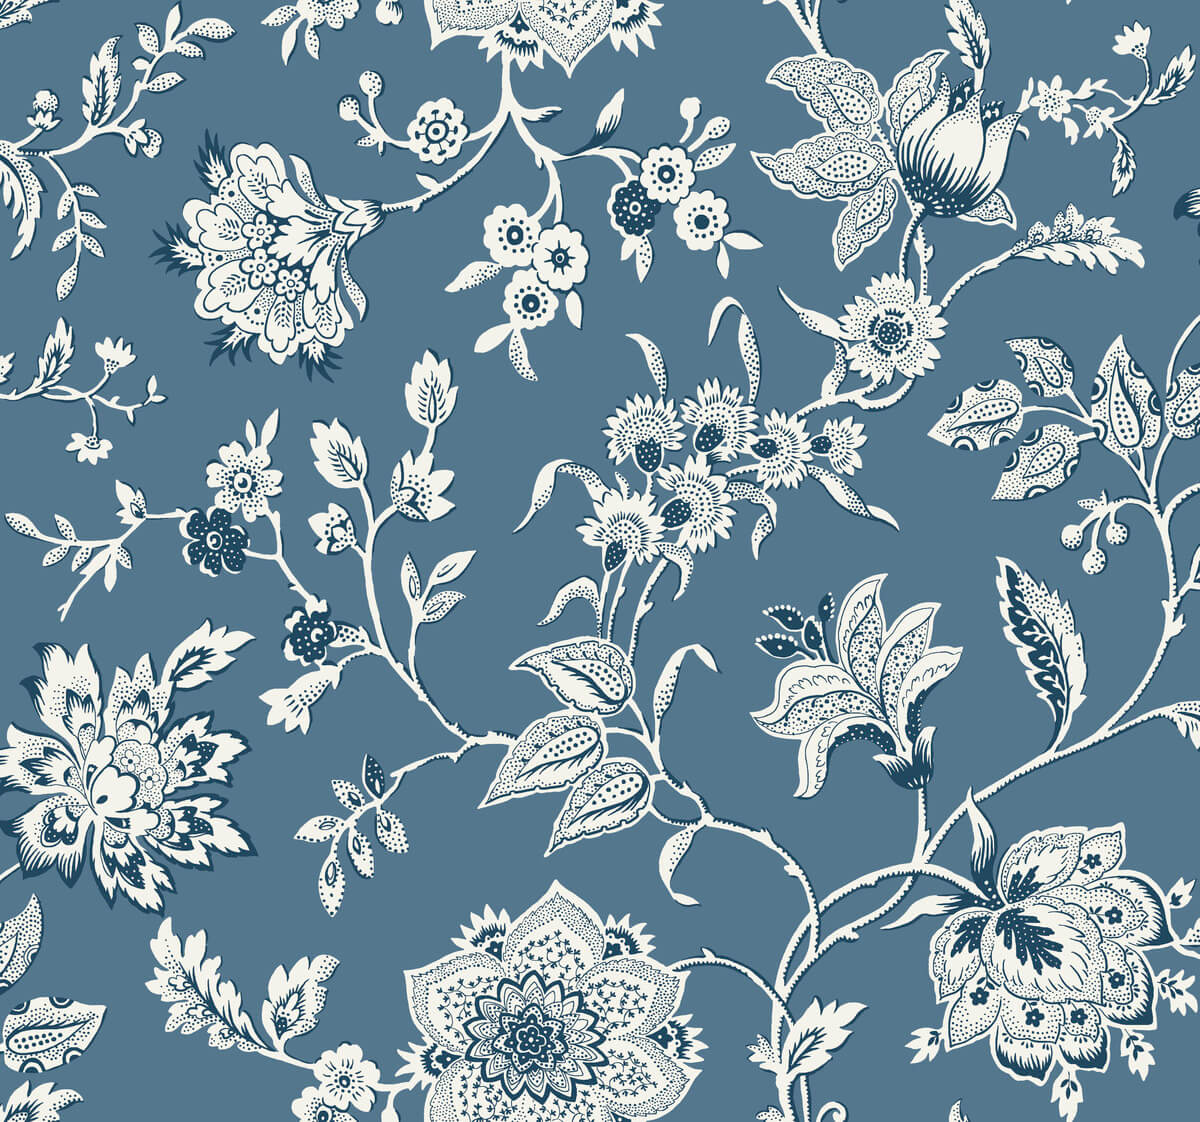 Toile Resource Library Sutton Wallpaper - Blue